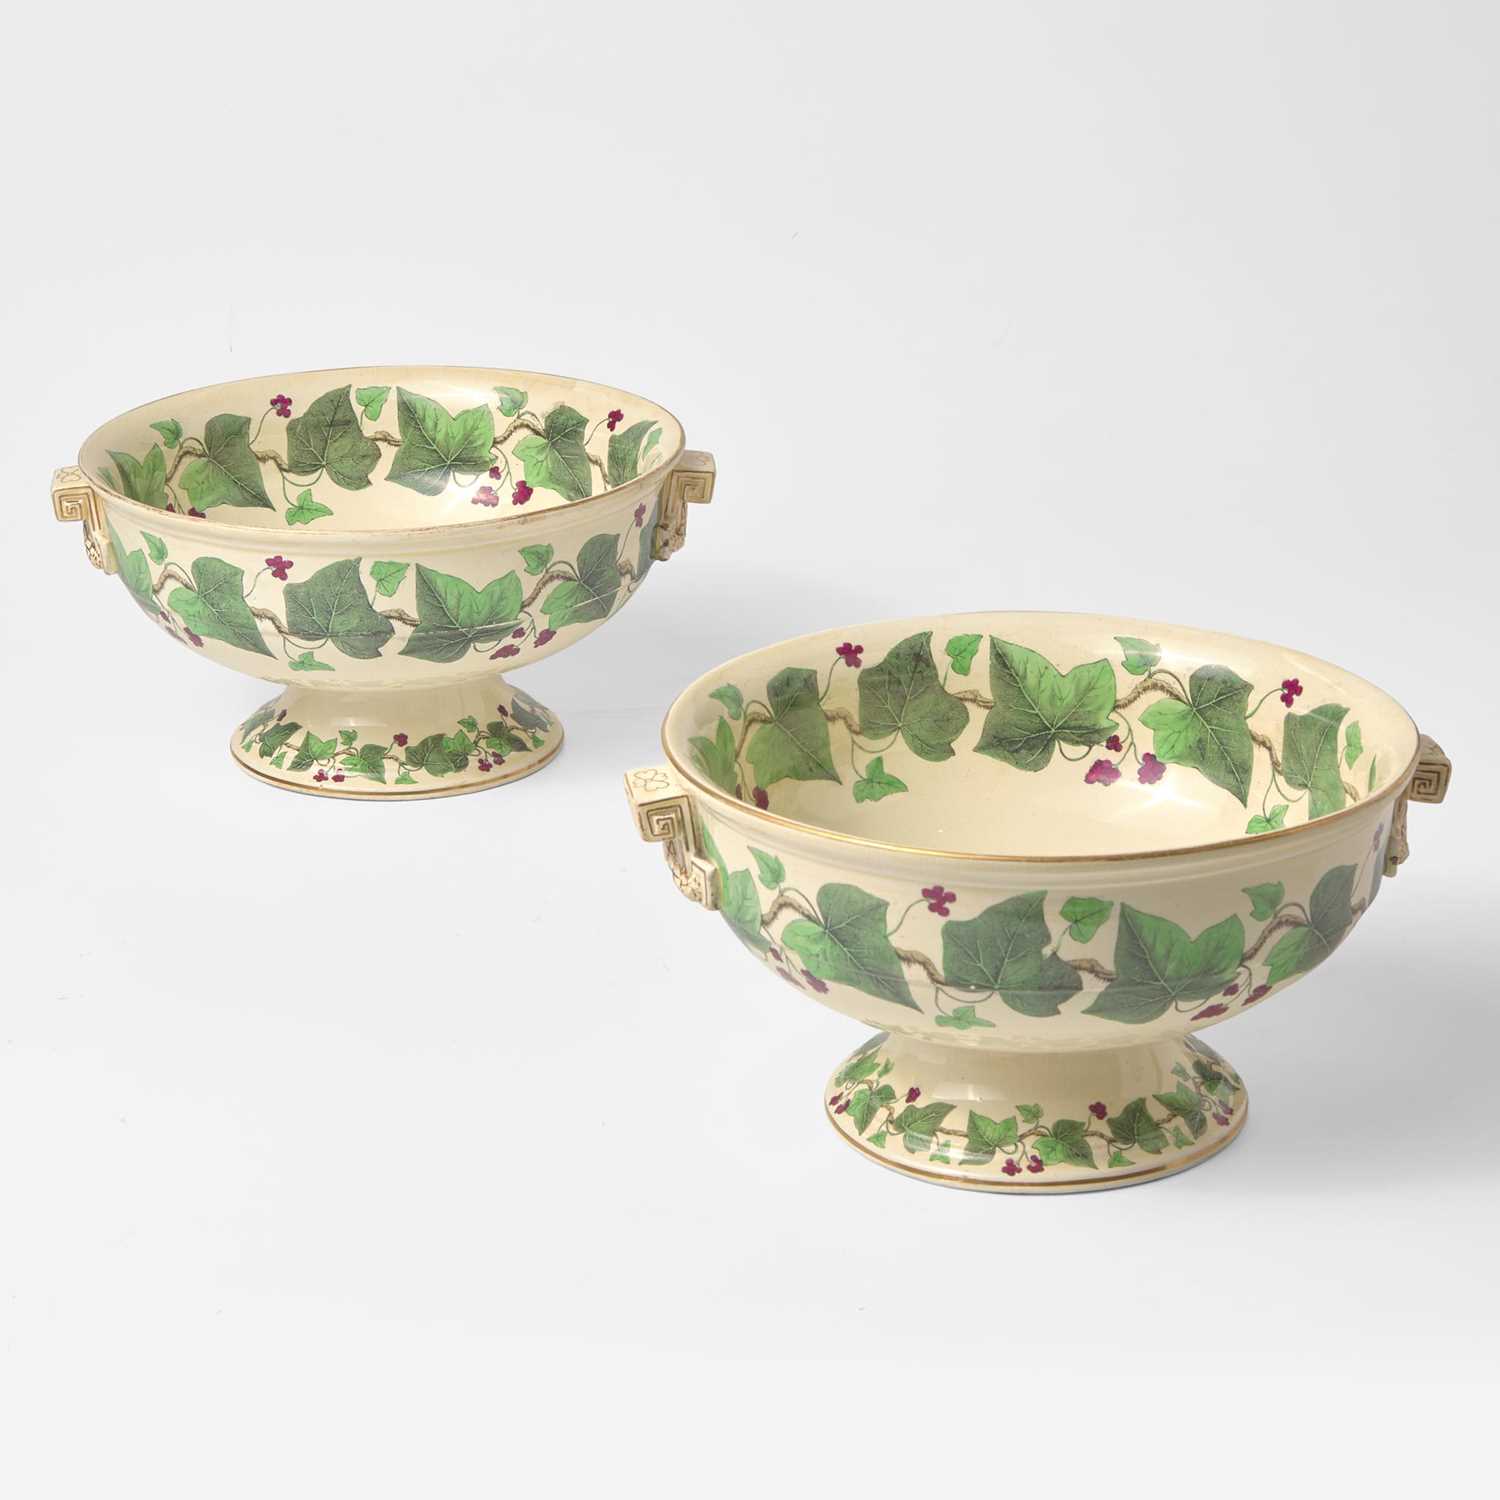 Lot 124 - A Pair of Wedgwood Napoleon Ivy Pattern Queensware Footed Serving Bowls